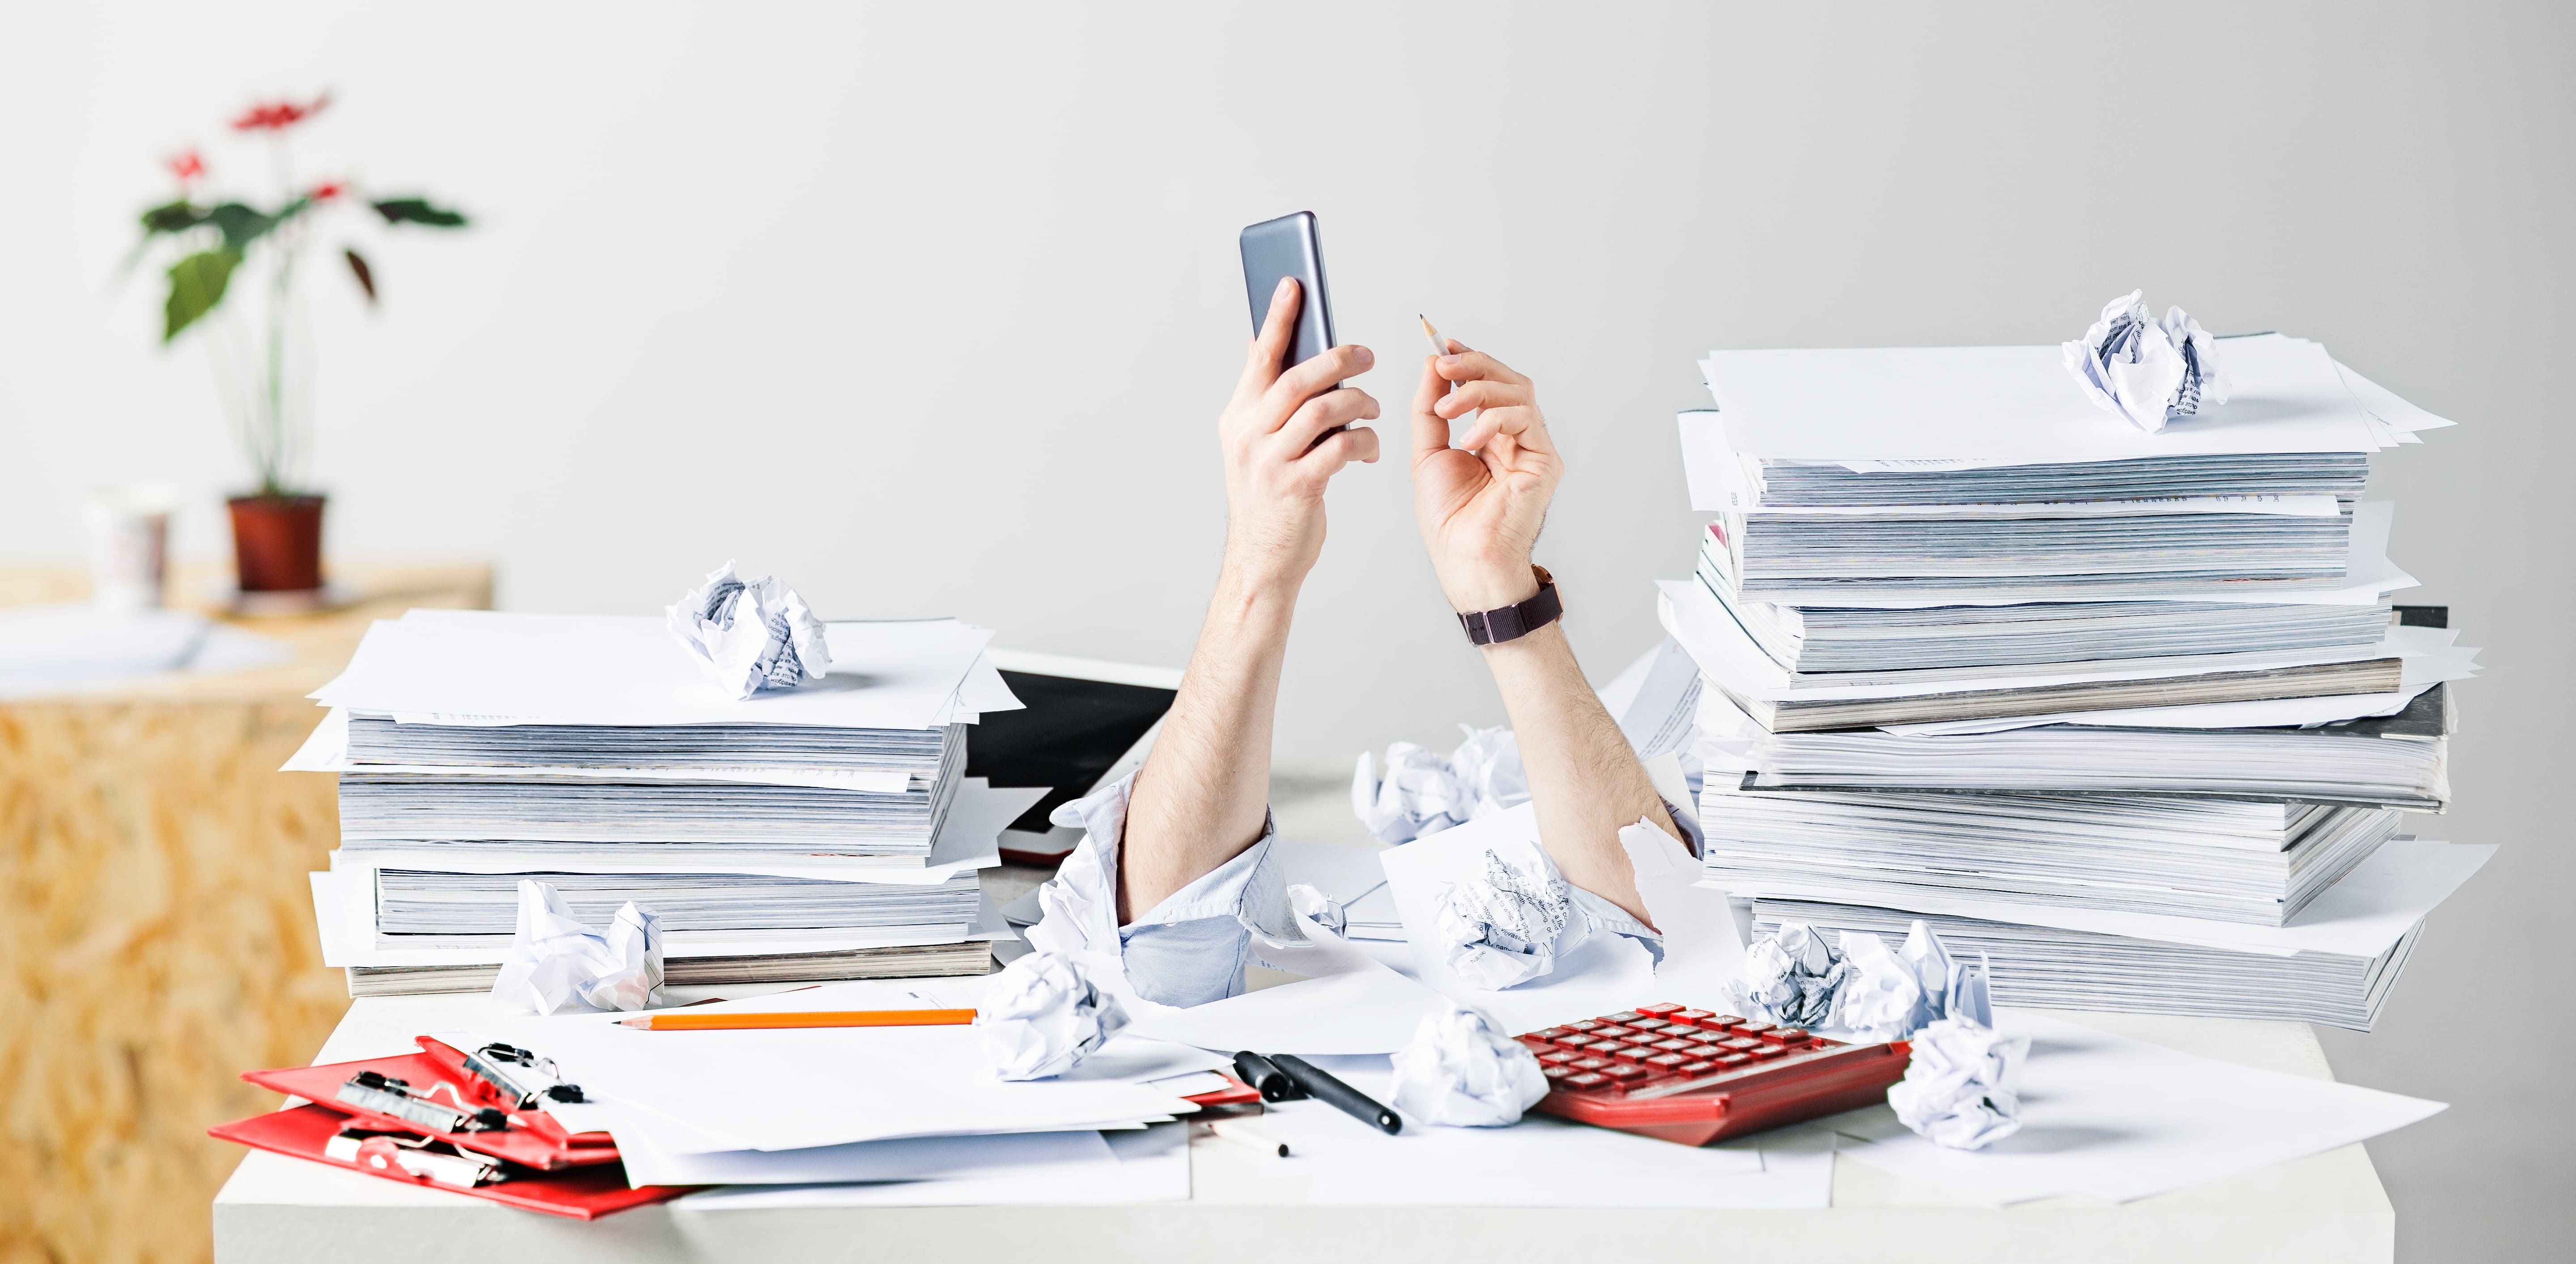 What's Stopping You from Digitizing Your Field Operations and Going Paperless?